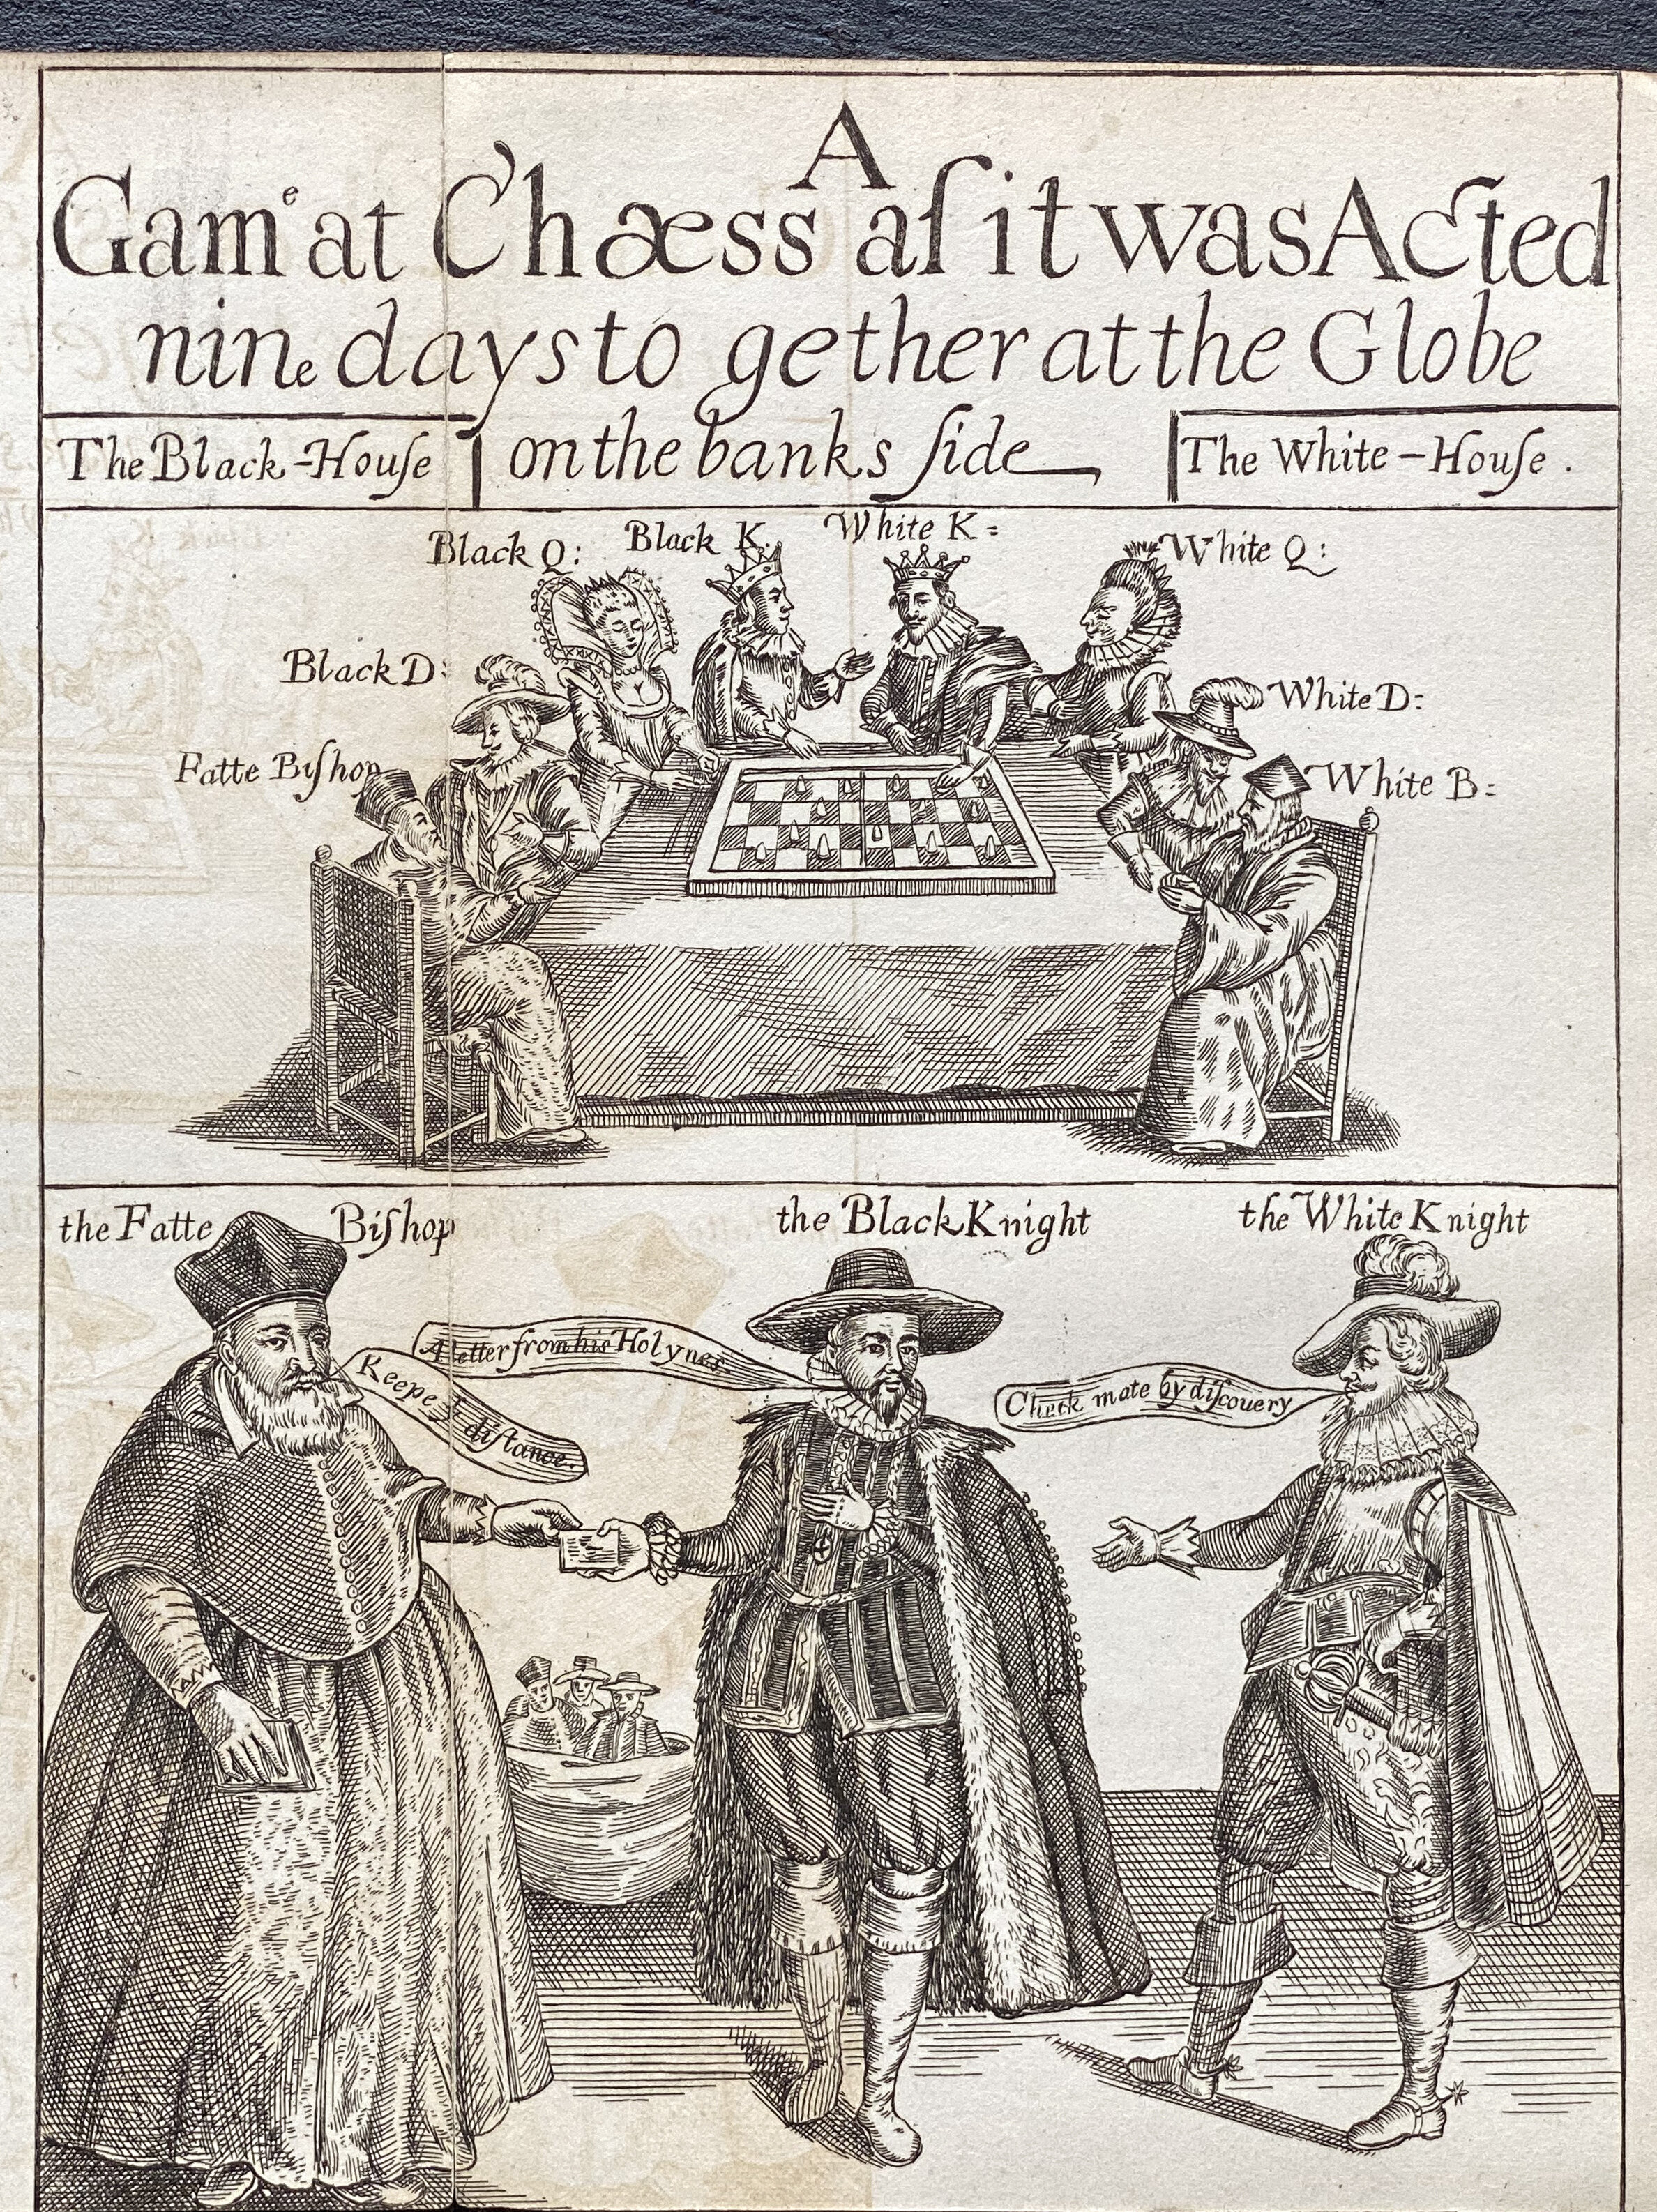 A Game at Chess by Thomas Middleton